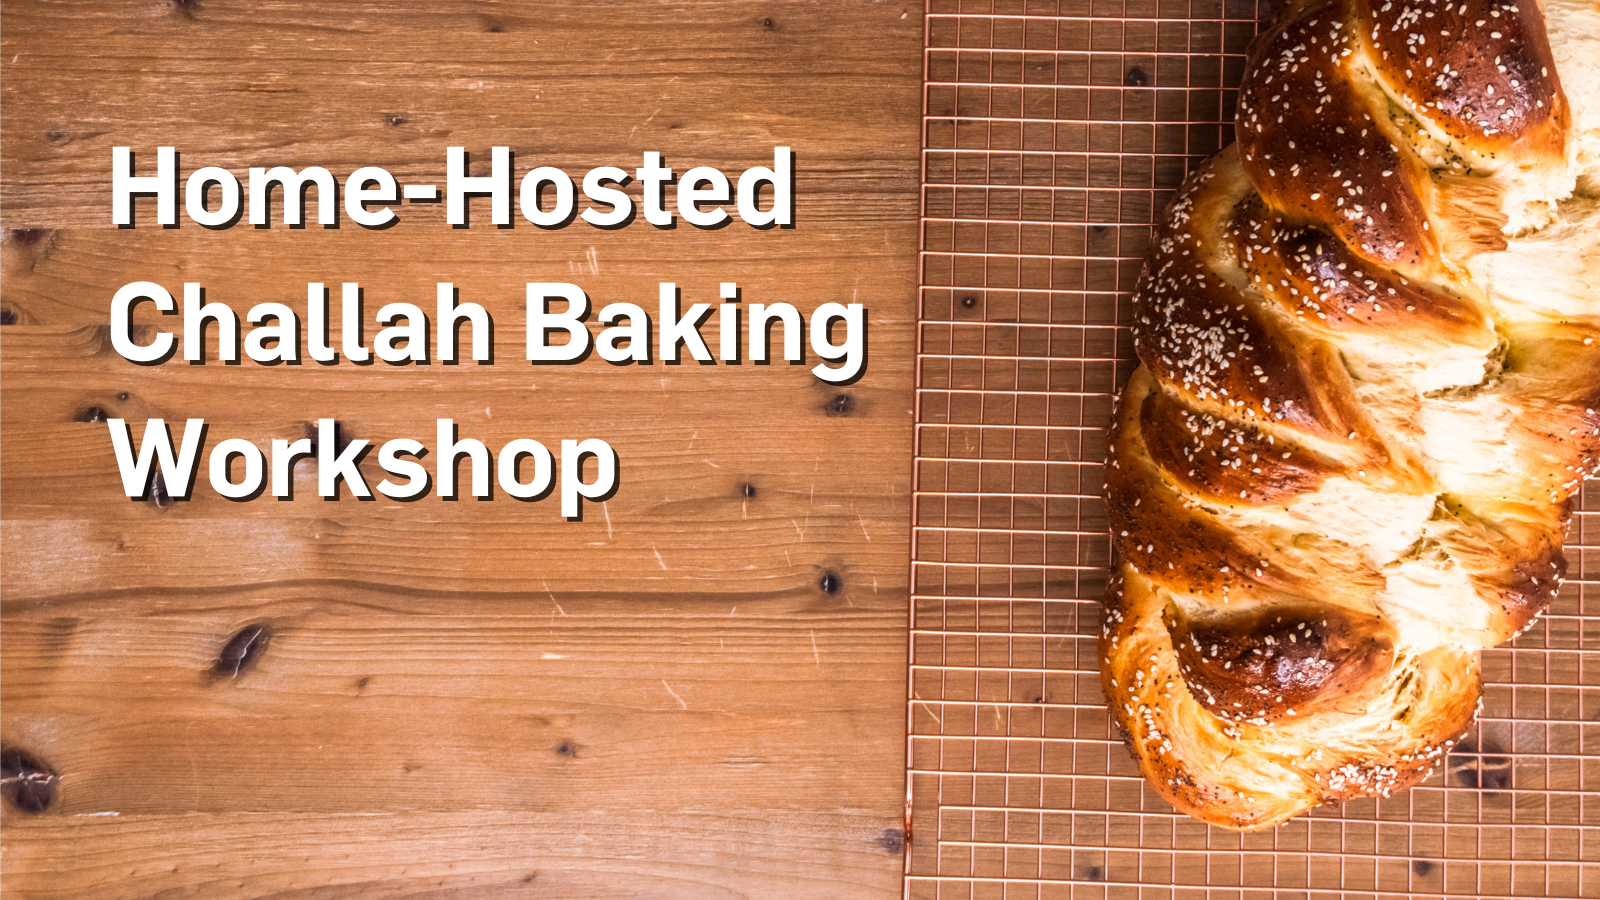 Home-Hosted Challah Baking Workshop